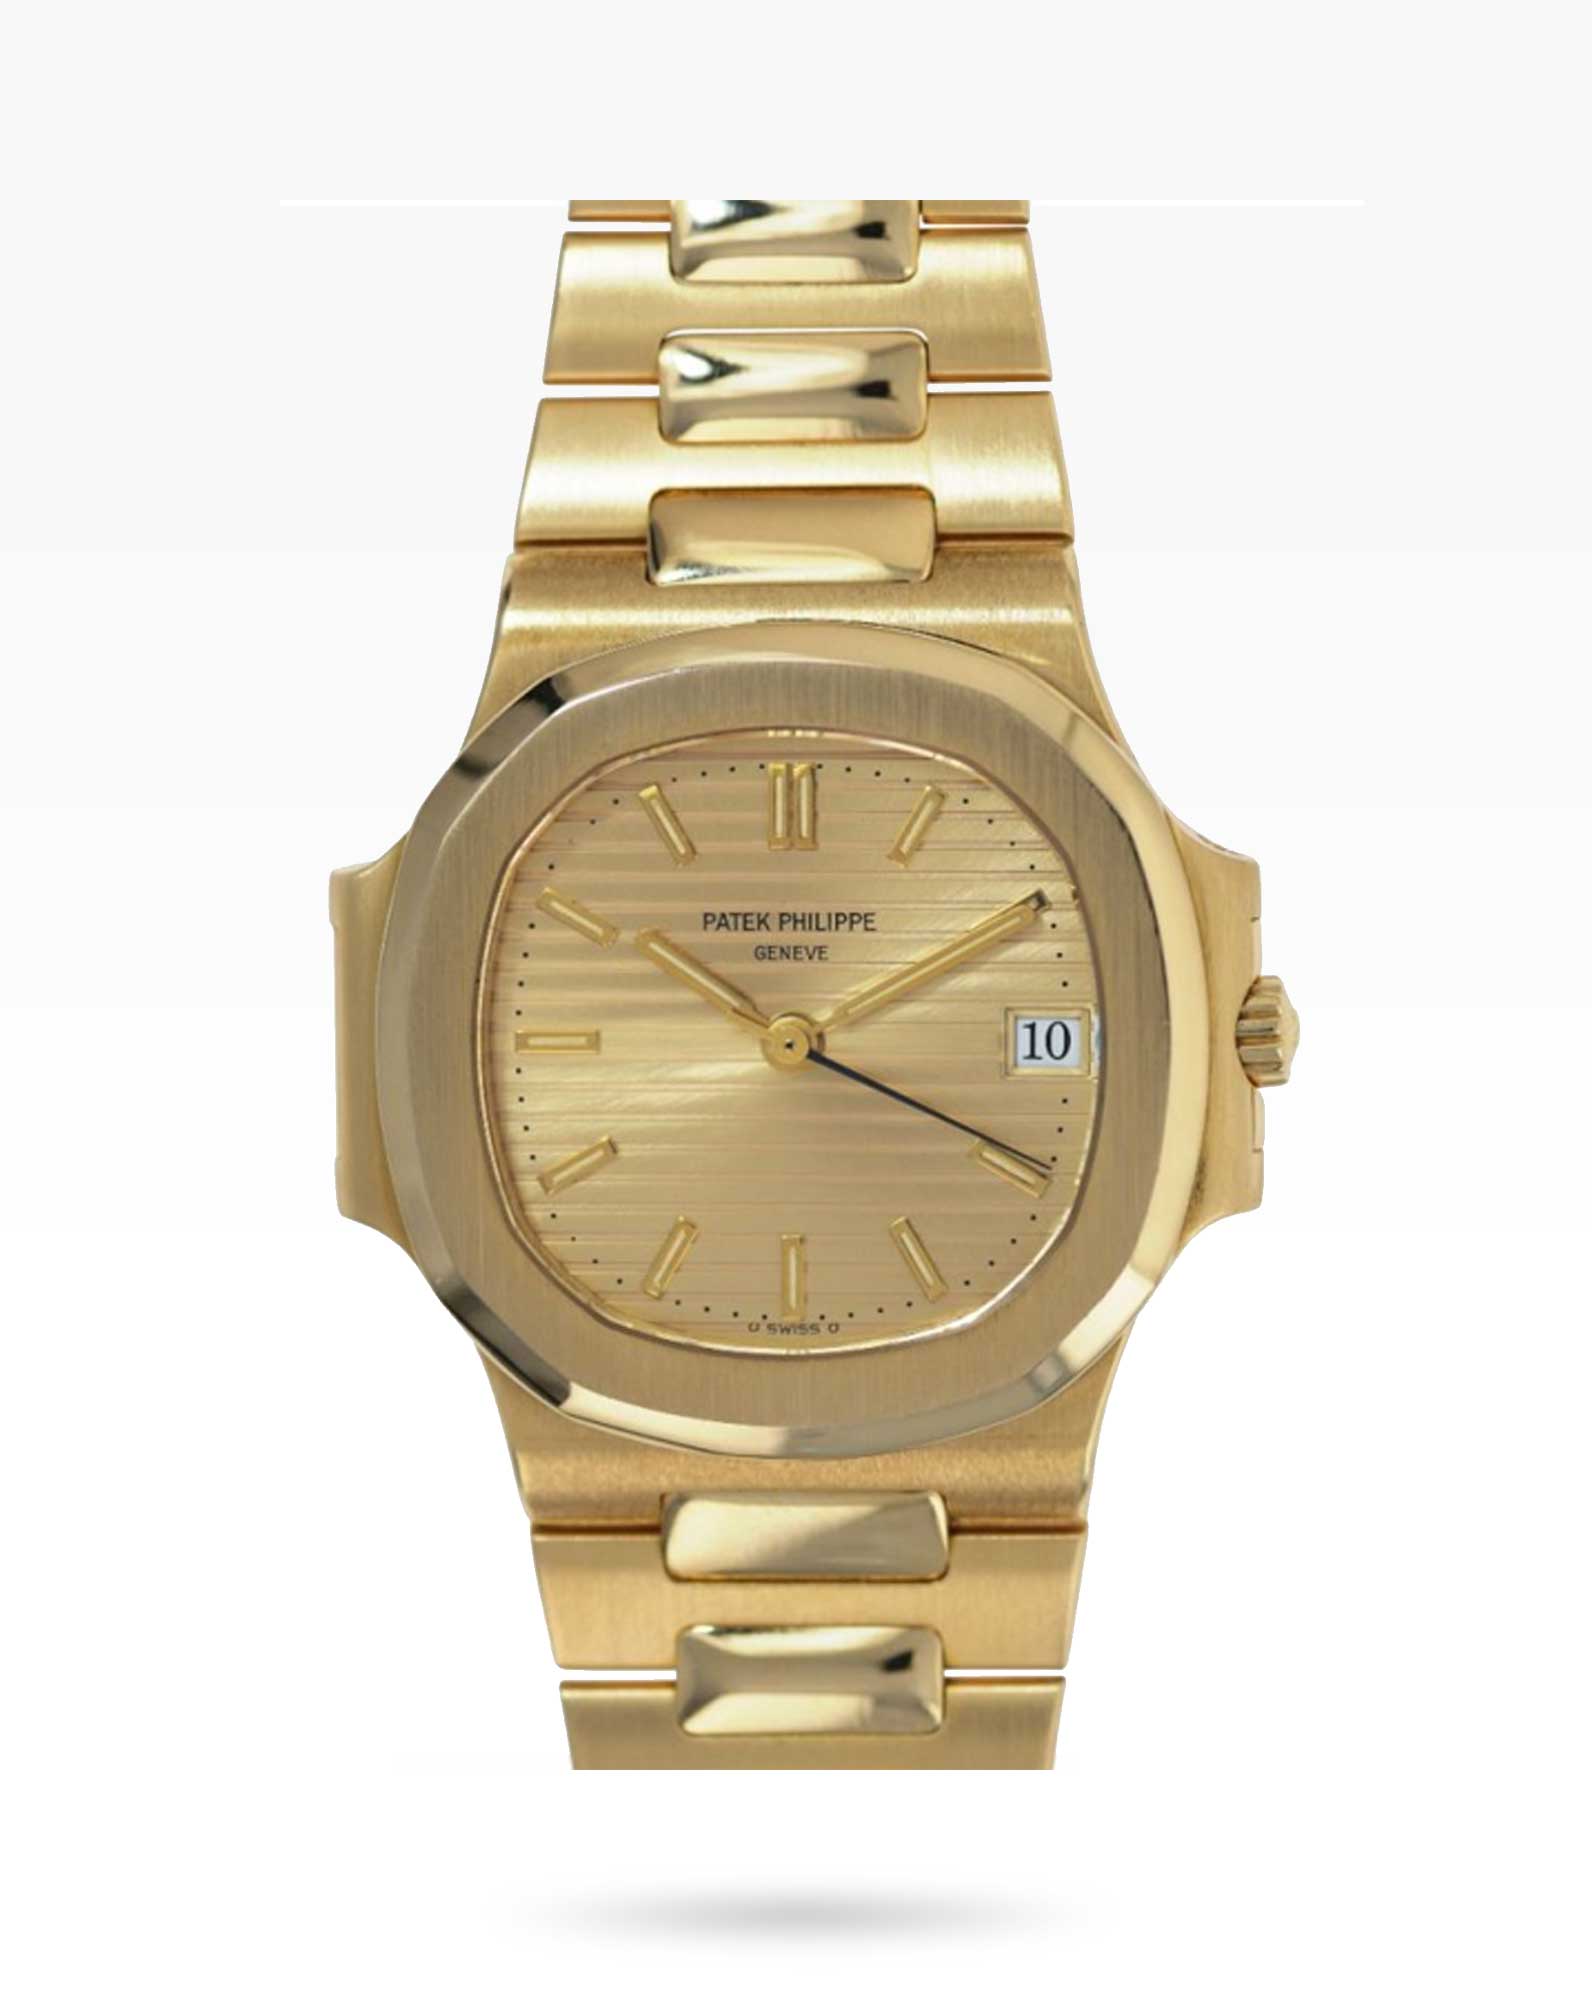 Patek Philippe Nautilus Ref.3800 Yellow Gold Champagne Dial from 1991 - 2ToneVintage Watches